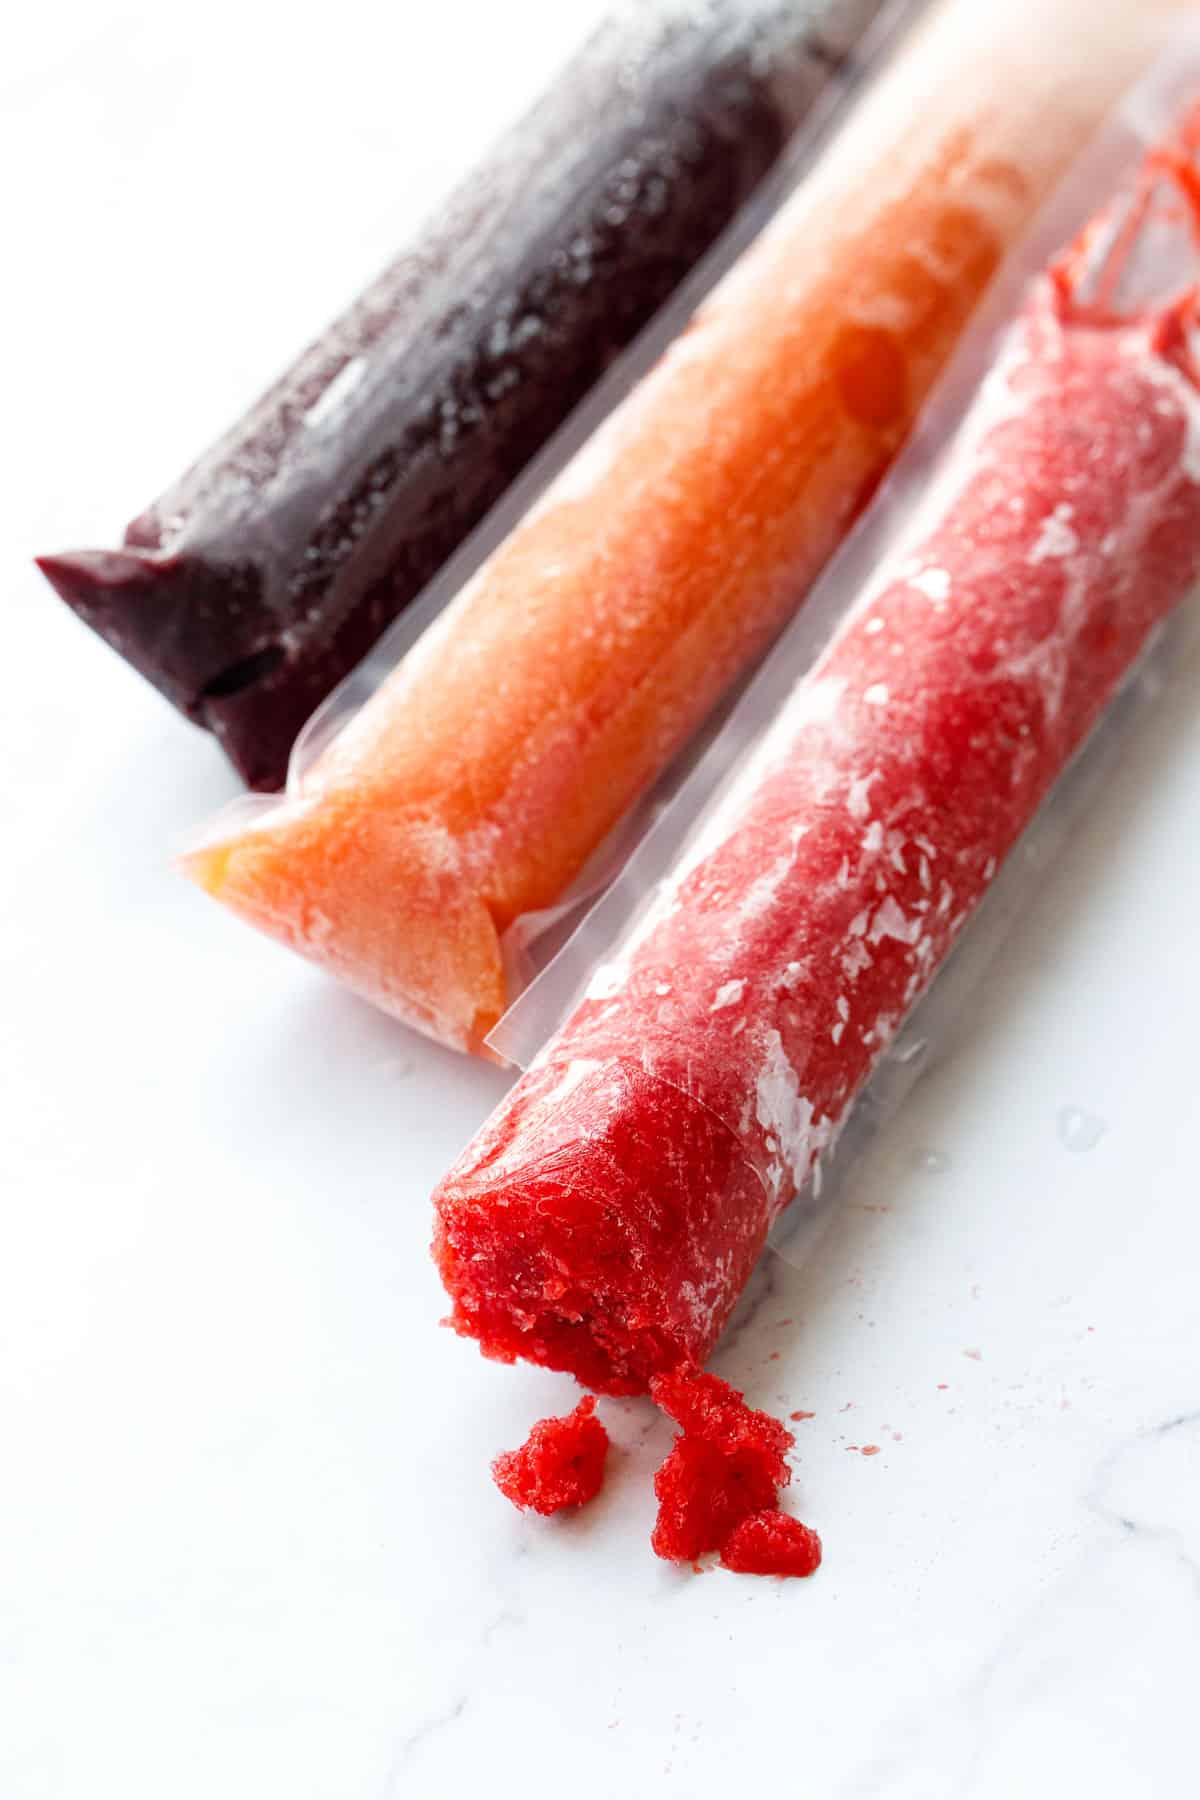 Three closeup Freezer Jam Fruit Ice Pops, one cut open and bitten into to show the unique texture.